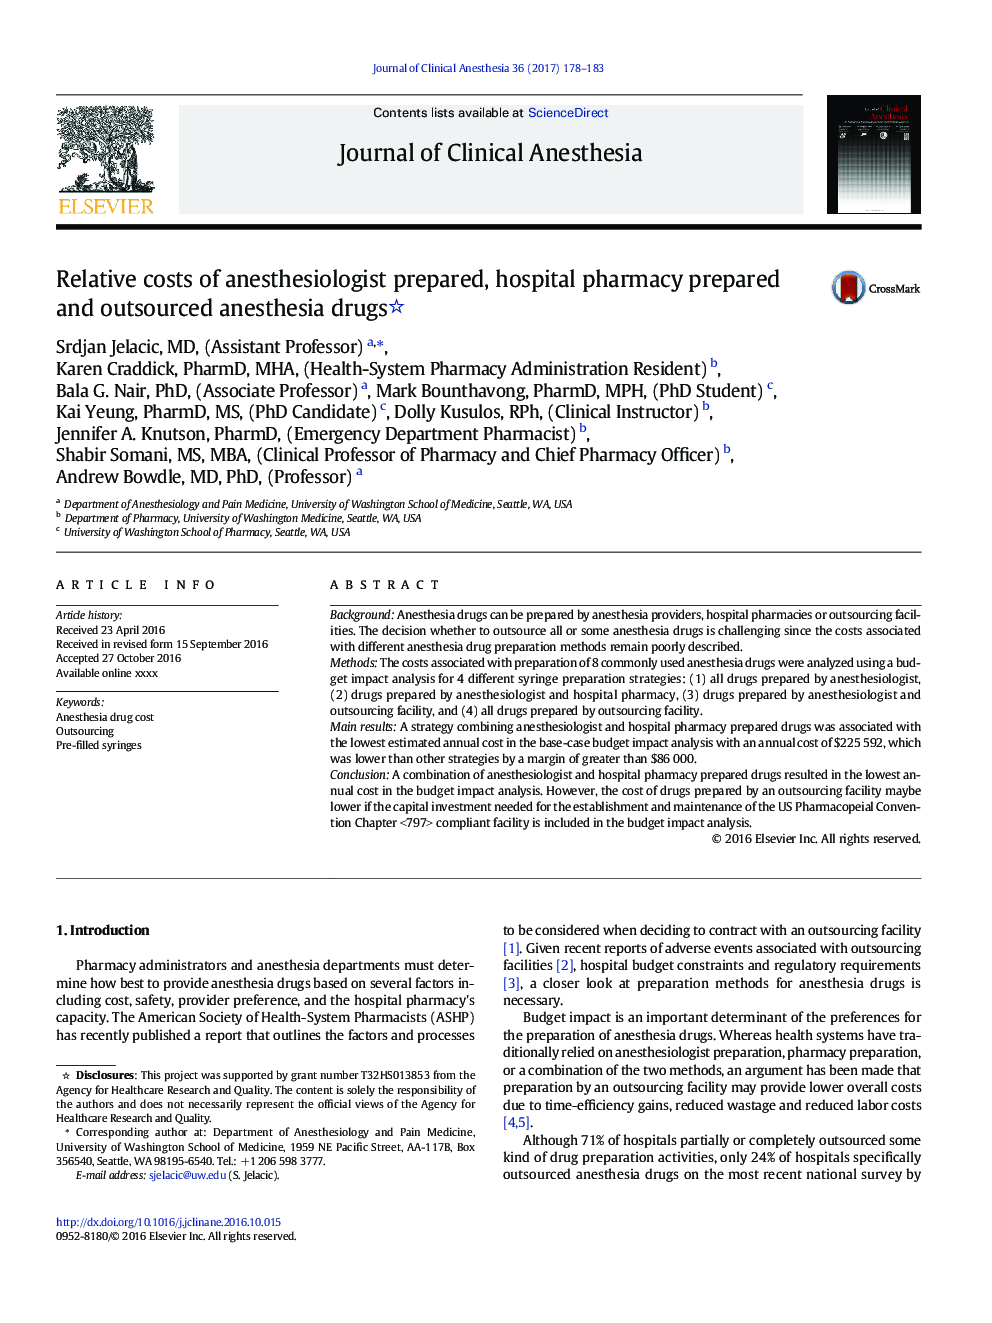 Relative costs of anesthesiologist prepared, hospital pharmacy prepared and outsourced anesthesia drugs